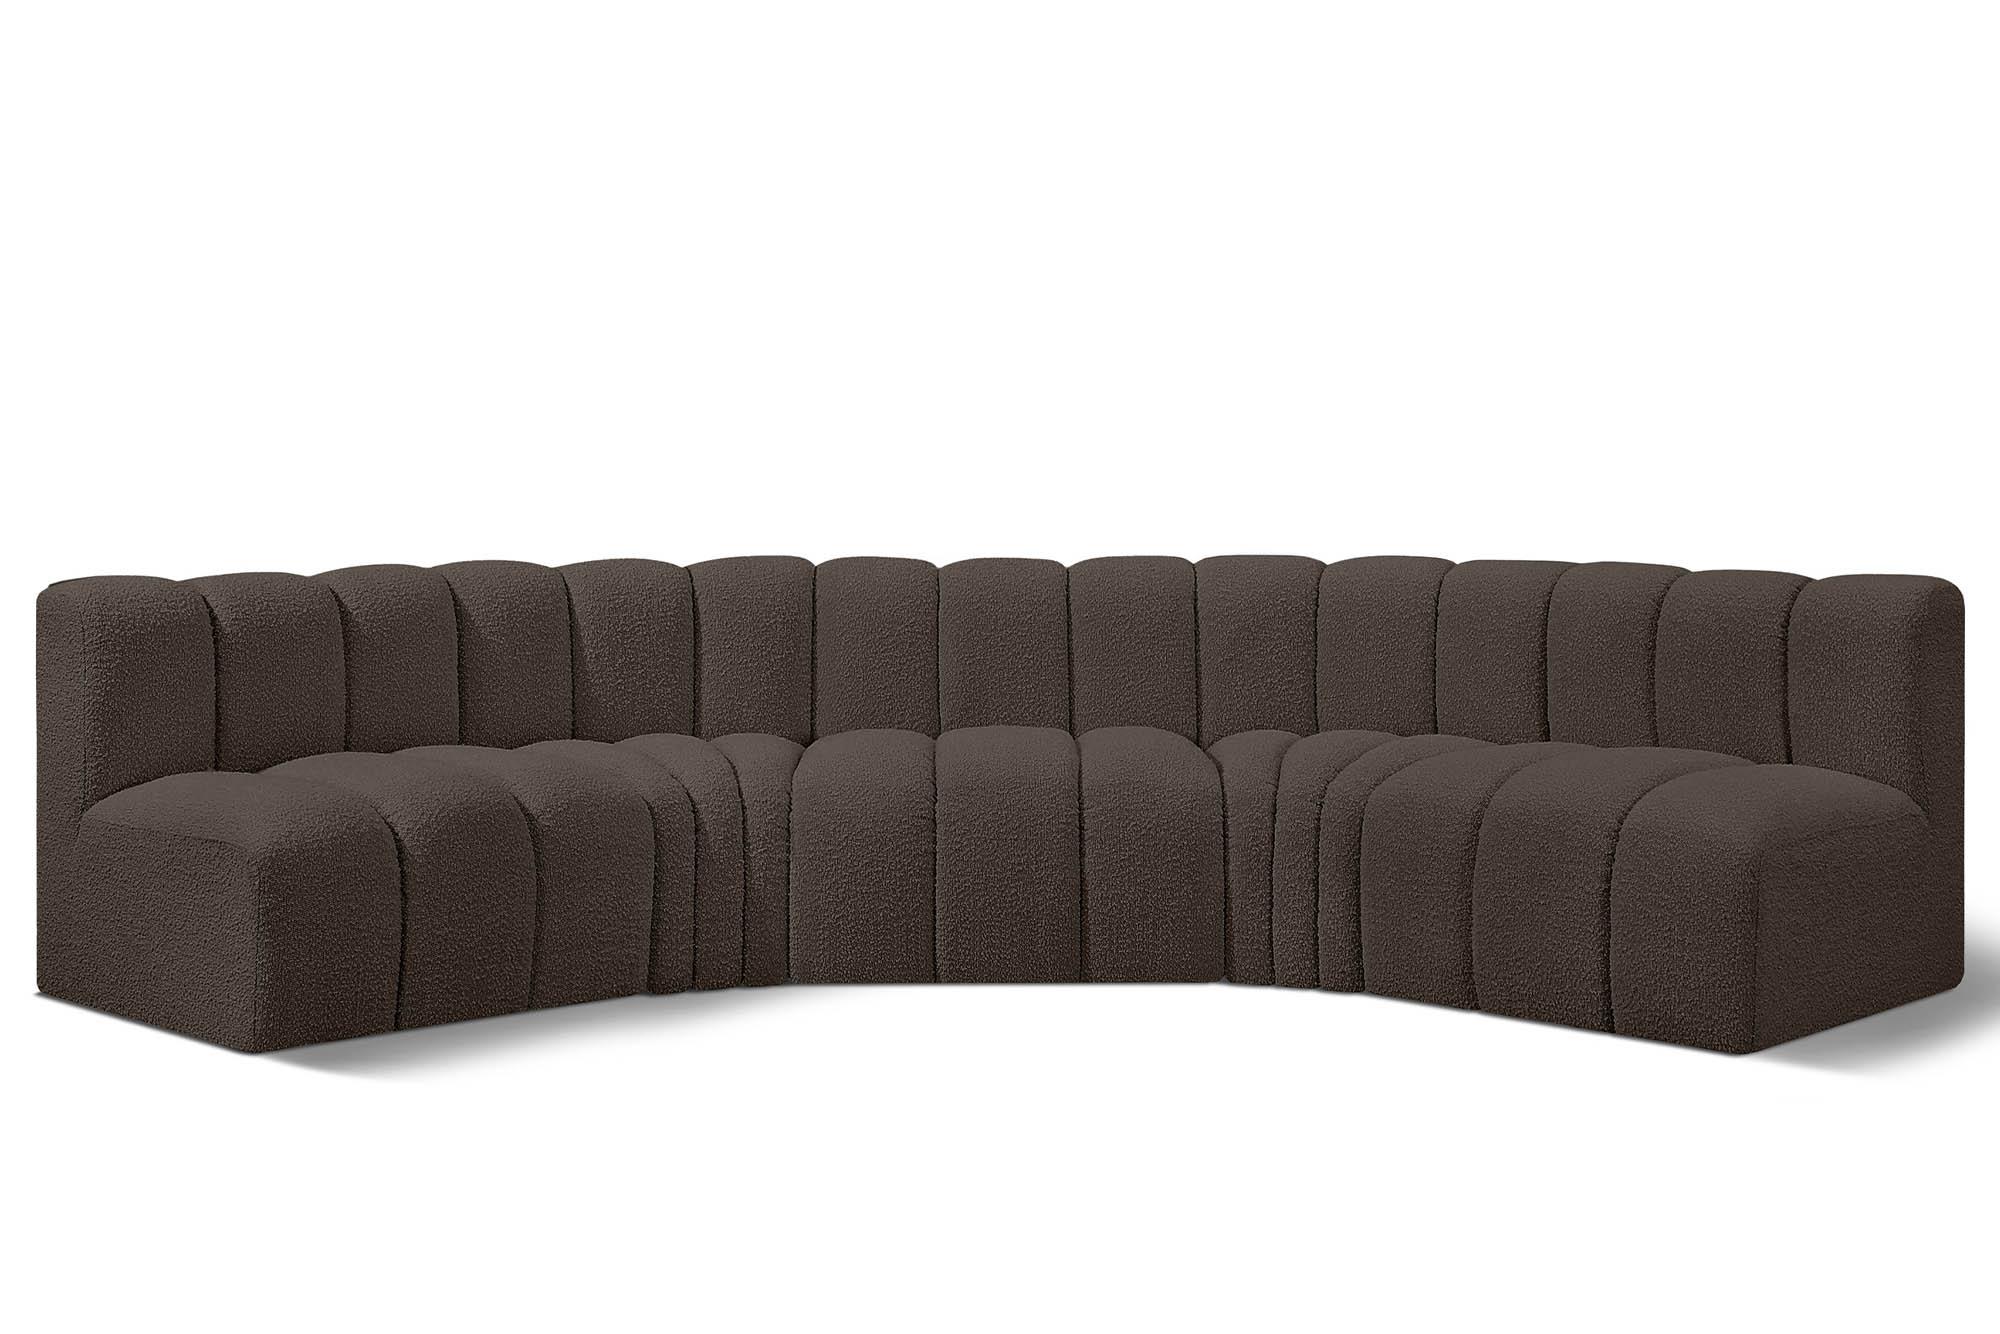 Contemporary, Modern Modular Sectional Sofa ARC 102Brown-S5A 102Brown-S5A in Brown 